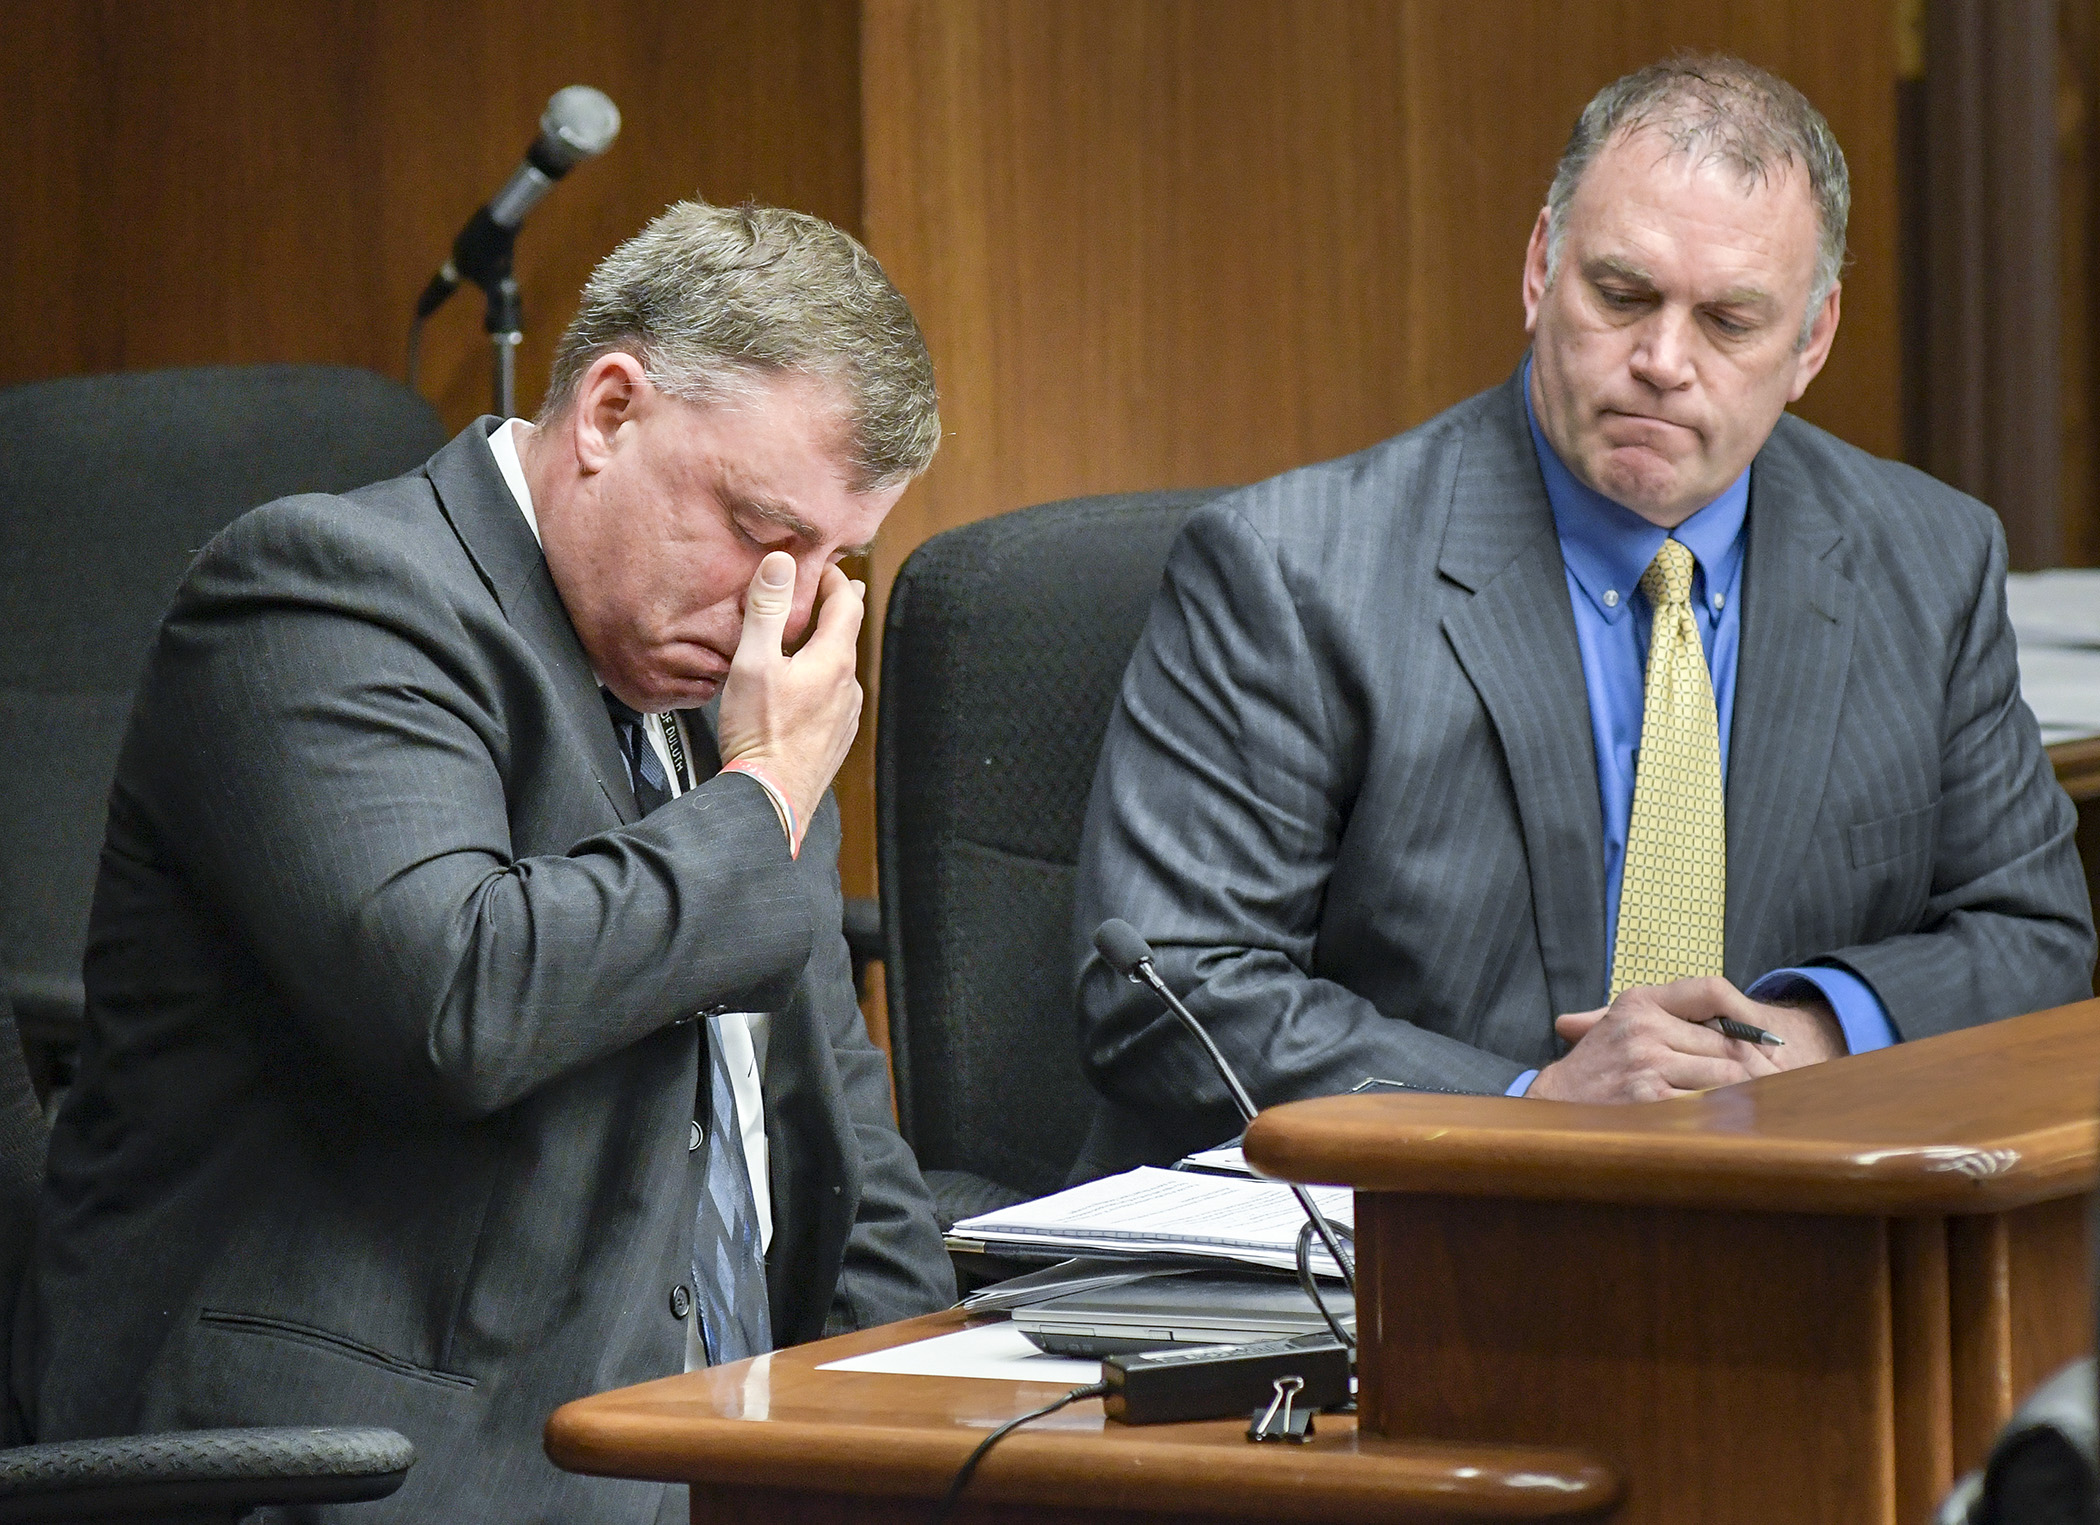 Duluth Police Department Lieutenant Jeff Kazel, left, pauses while relaying an emotional story to members of the House Health and Human Services Reform Committee March 1 during testimony on a bill sponsored by Rep. Dave Baker, right.